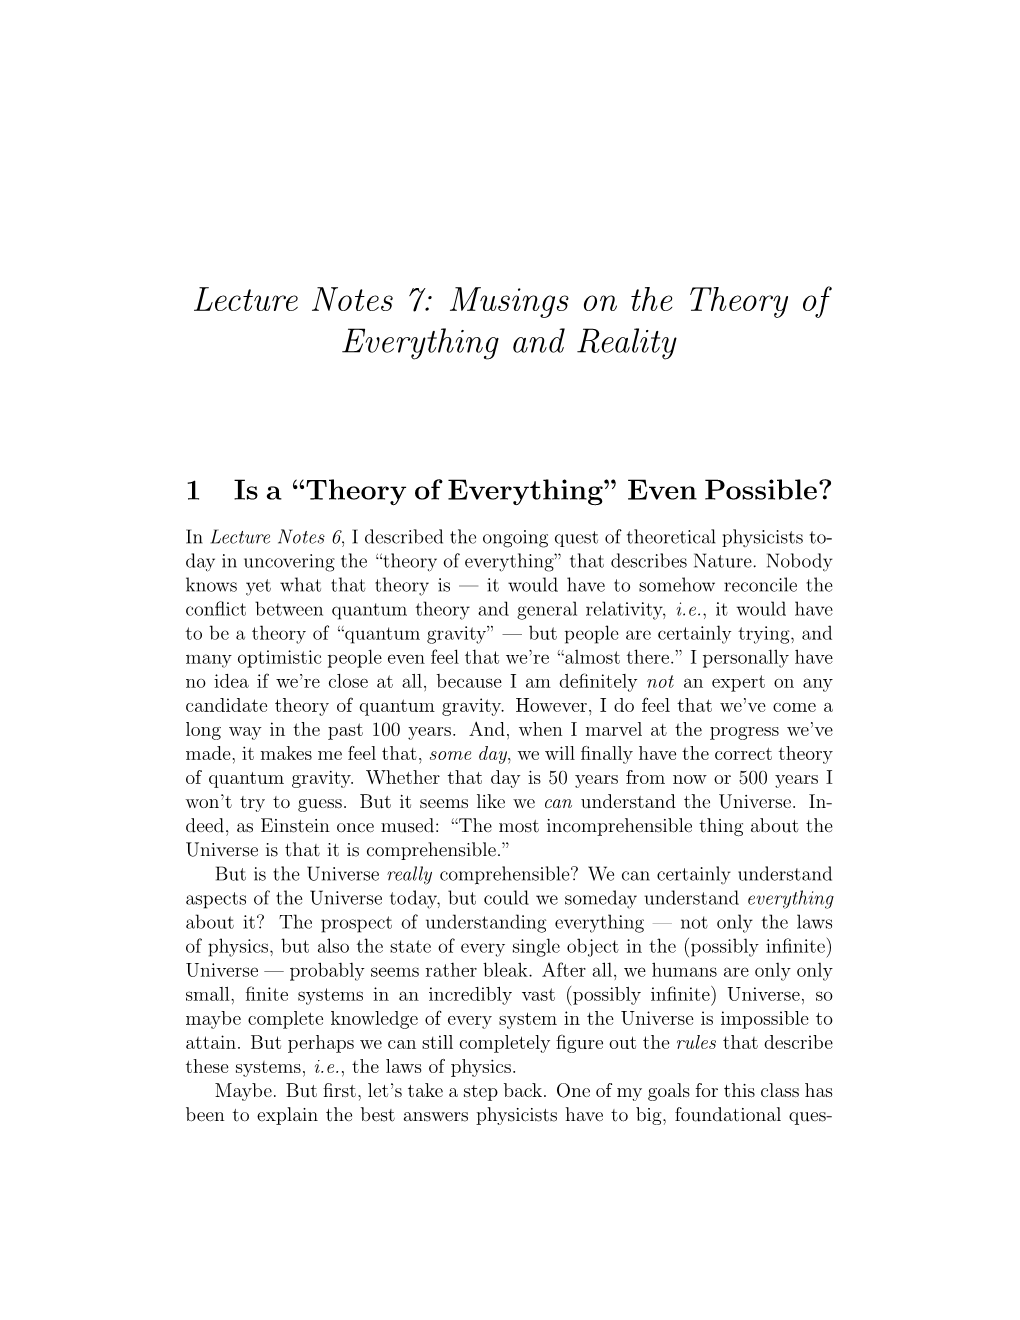 Musings on the Theory of Everything and Reality (PDF)